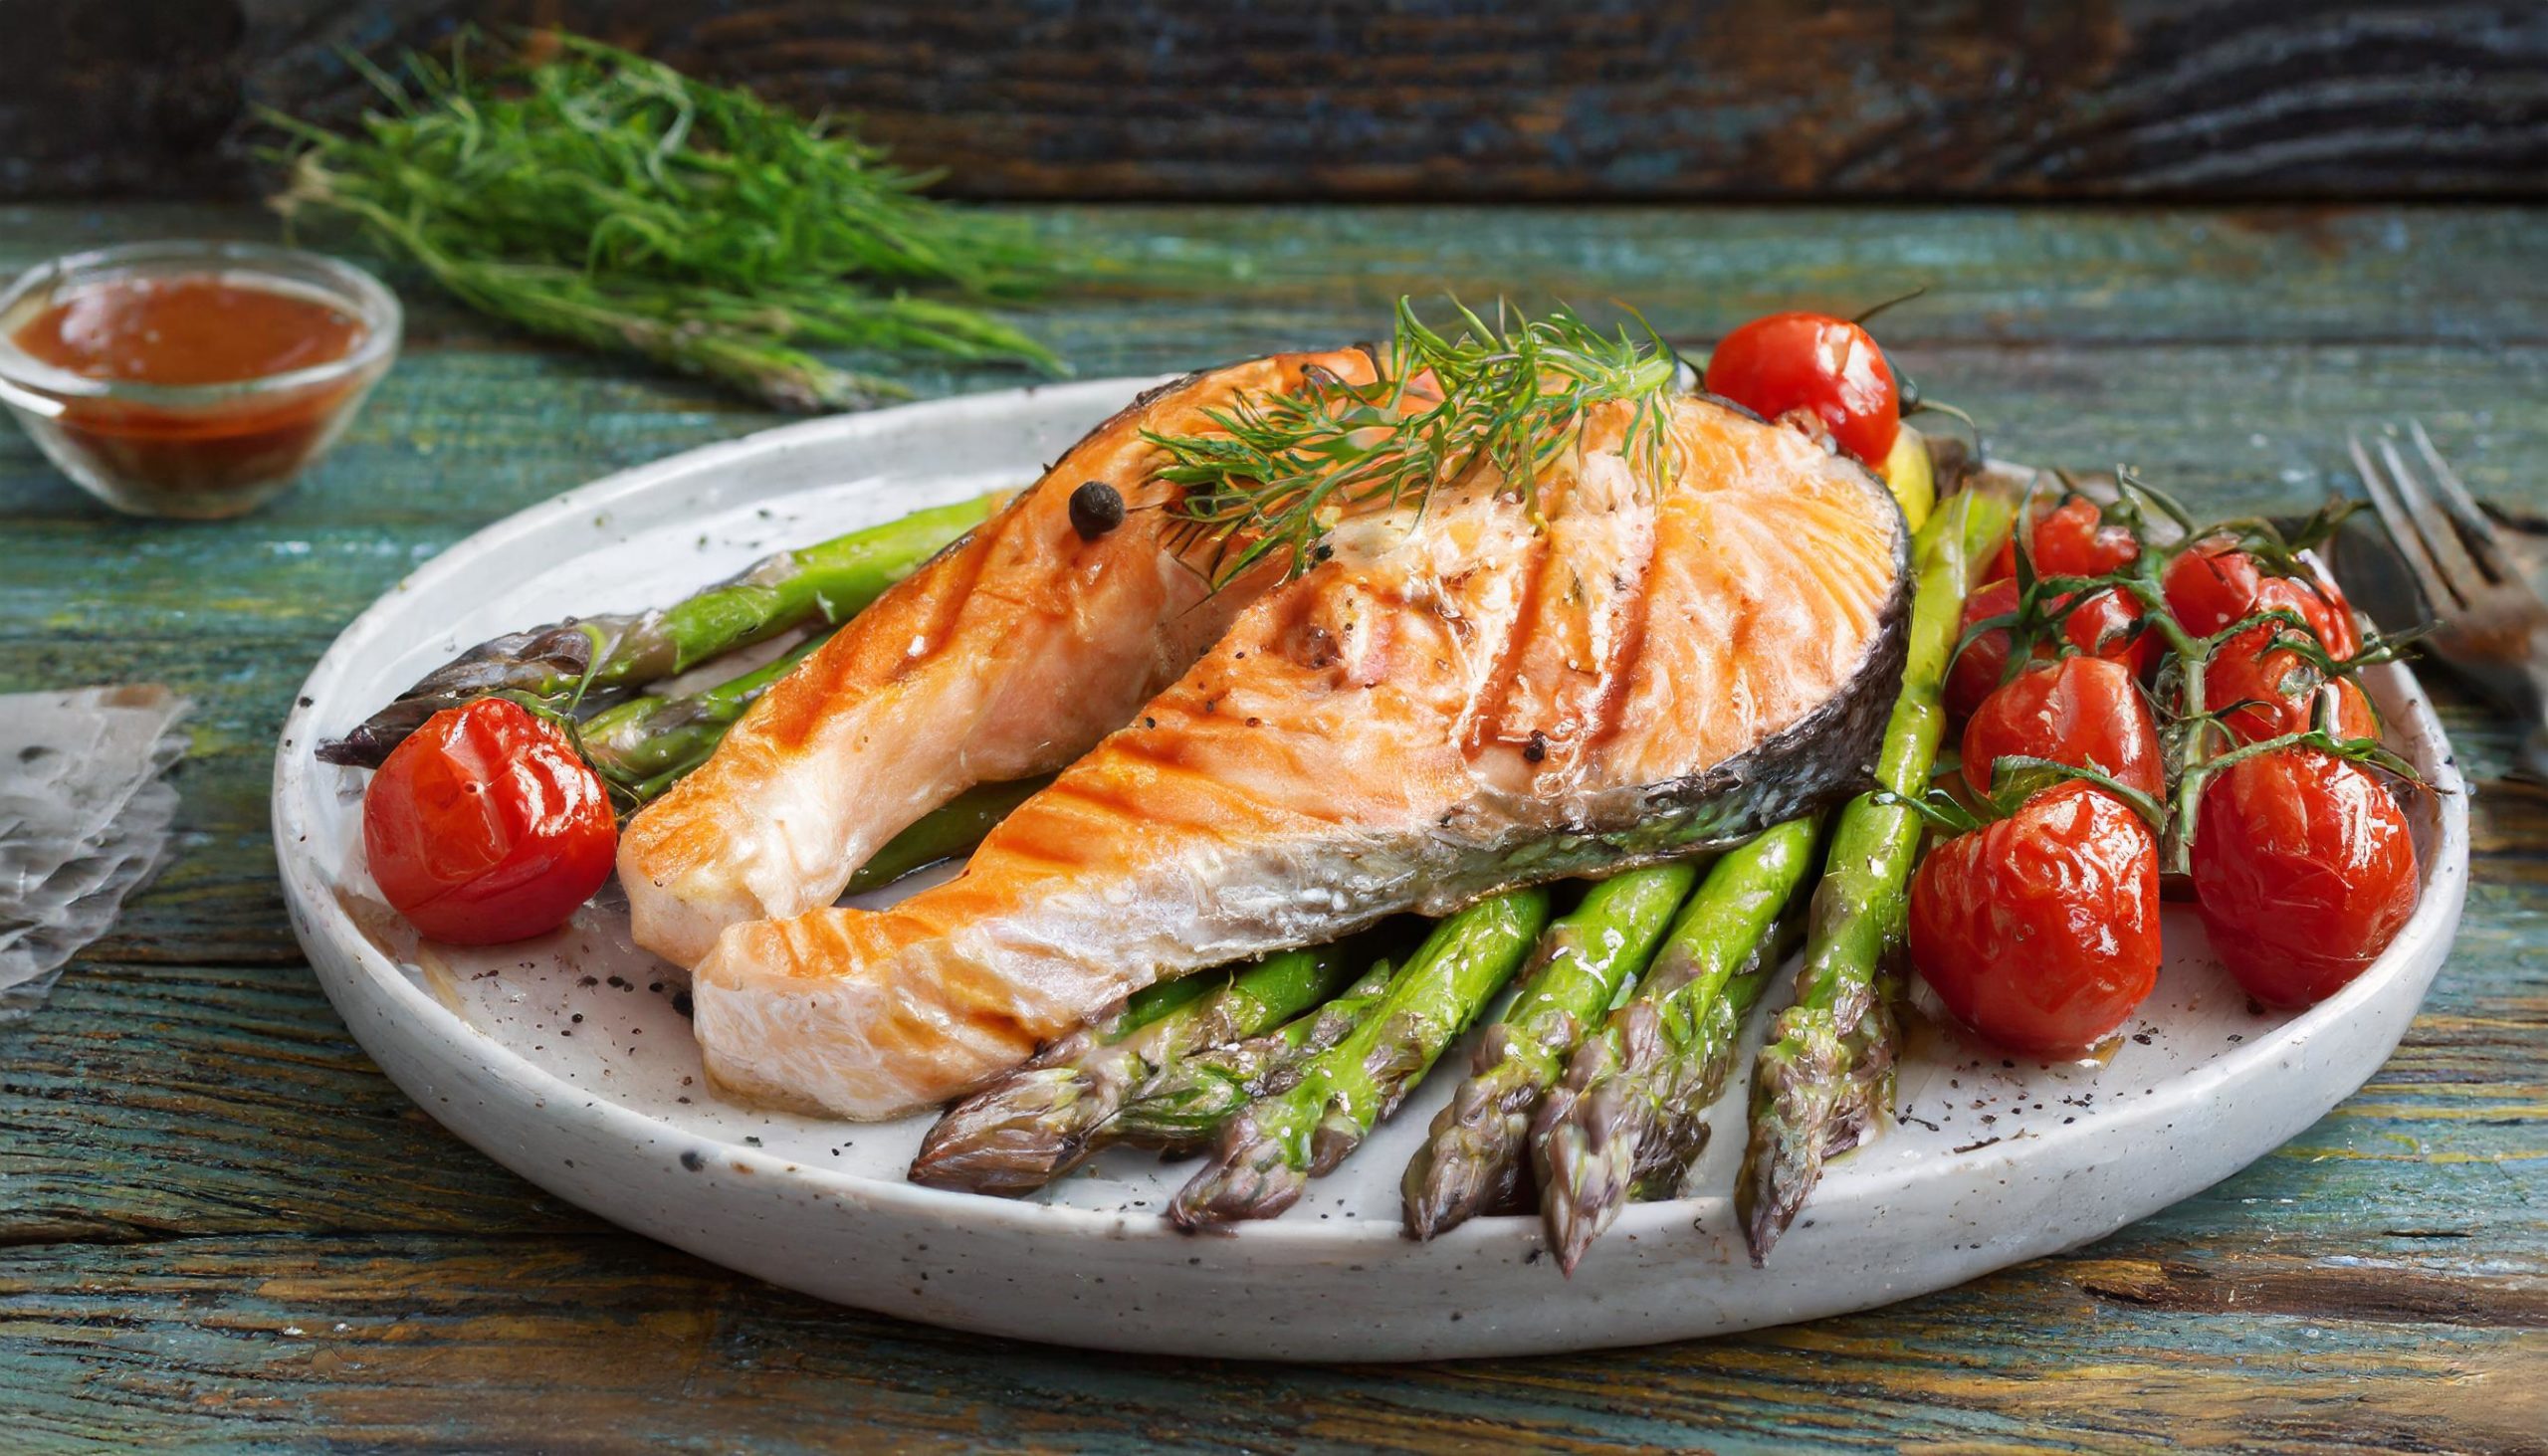 Grilled salmon with asparagus and tomatoes